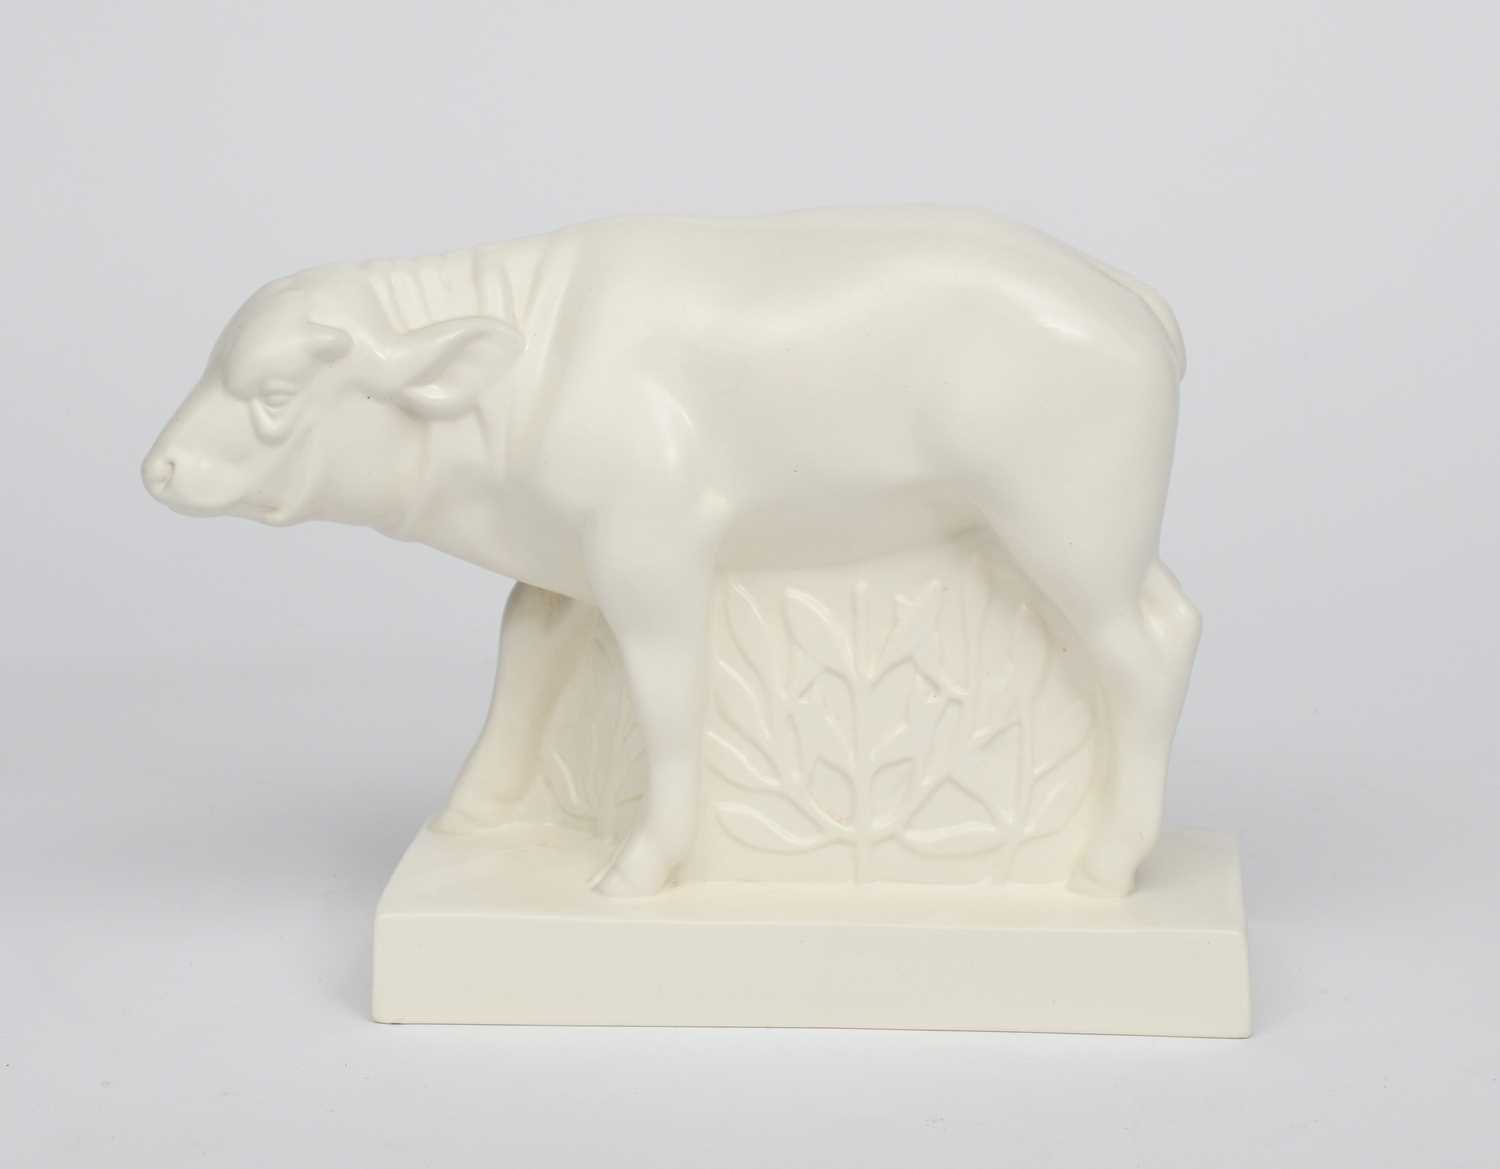 'Bison' a Wedgwood Pottery sculpture designed by John Skeaping, covered in a matt white Moonstone